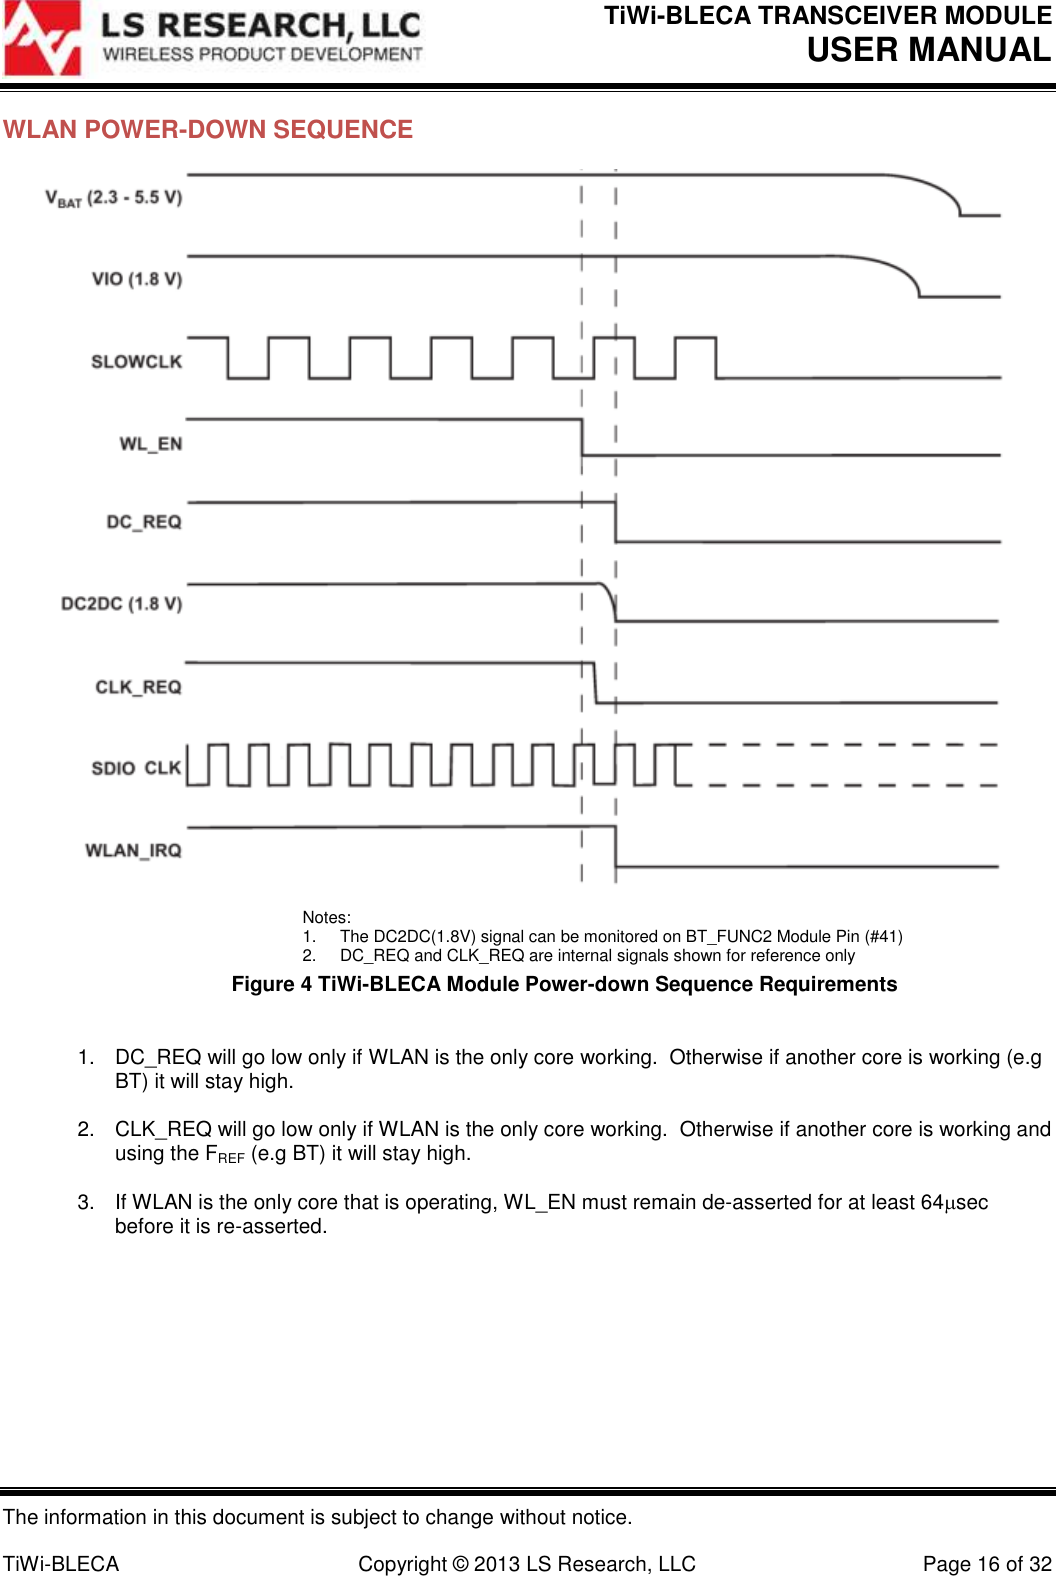 TiWi-BLECA TRANSCEIVER MODULE USER MANUAL   The information in this document is subject to change without notice.  TiWi-BLECA  Copyright © 2013 LS Research, LLC  Page 16 of 32 WLAN POWER-DOWN SEQUENCE  Notes: 1.  The DC2DC(1.8V) signal can be monitored on BT_FUNC2 Module Pin (#41) 2.  DC_REQ and CLK_REQ are internal signals shown for reference only Figure 4 TiWi-BLECA Module Power-down Sequence Requirements  1.  DC_REQ will go low only if WLAN is the only core working.  Otherwise if another core is working (e.g BT) it will stay high.  2.  CLK_REQ will go low only if WLAN is the only core working.  Otherwise if another core is working and using the FREF (e.g BT) it will stay high.  3.  If WLAN is the only core that is operating, WL_EN must remain de-asserted for at least 64sec before it is re-asserted.        